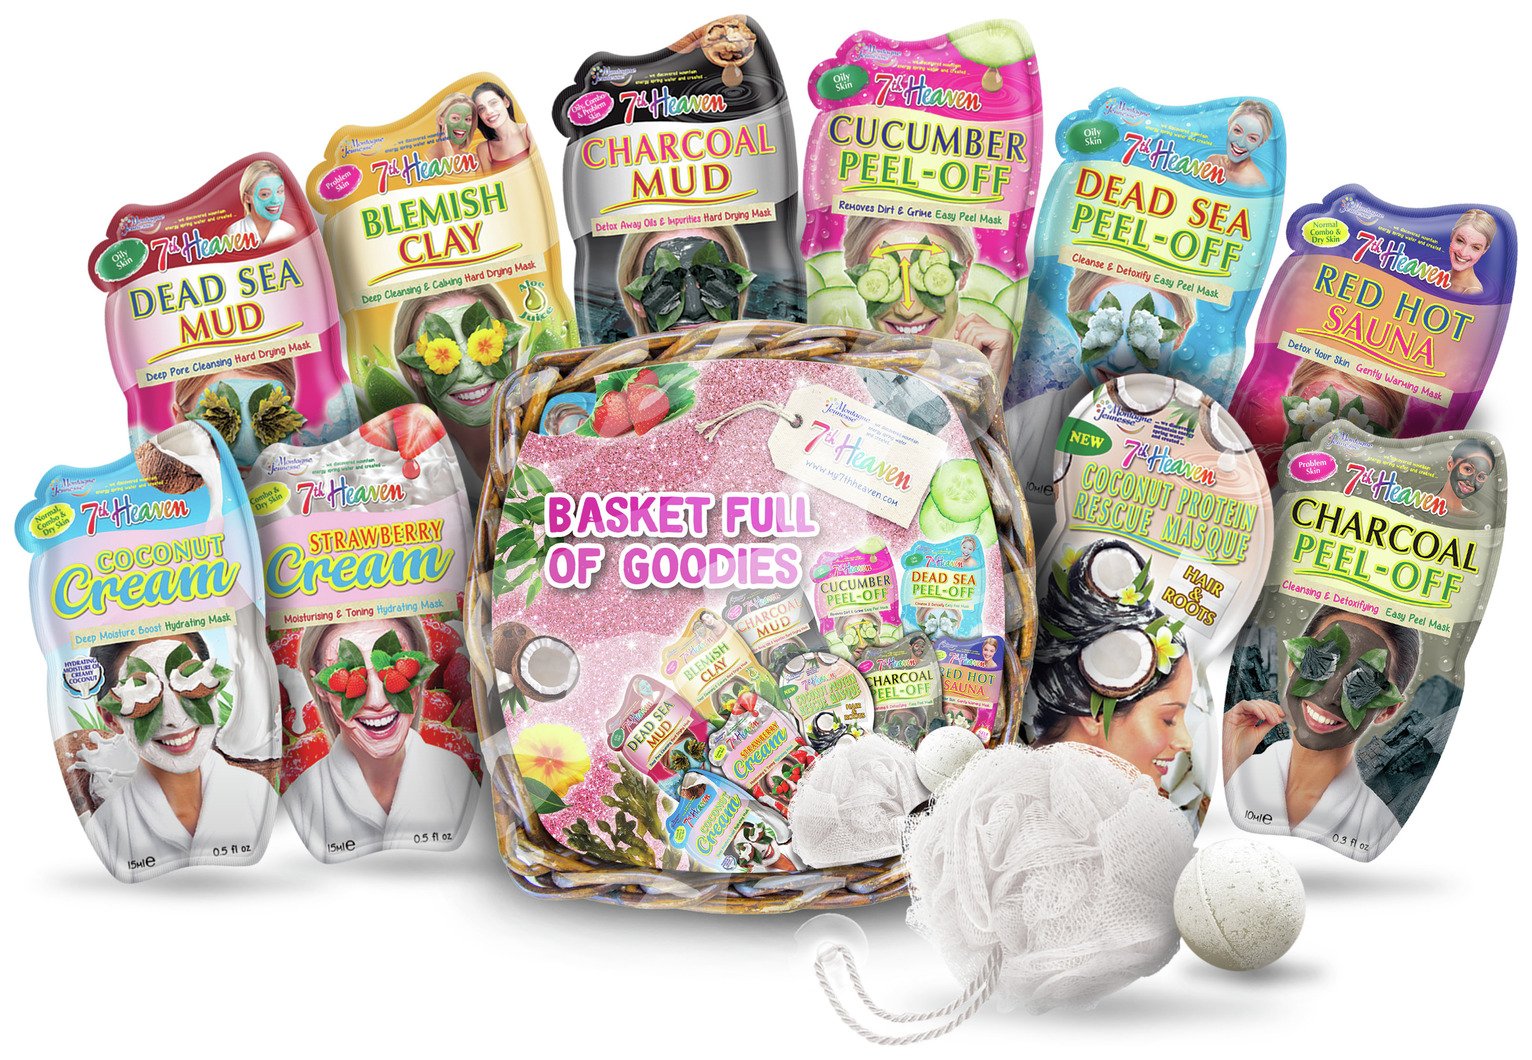 7th Heaven Face Mask Gift Basket Full of Goodies